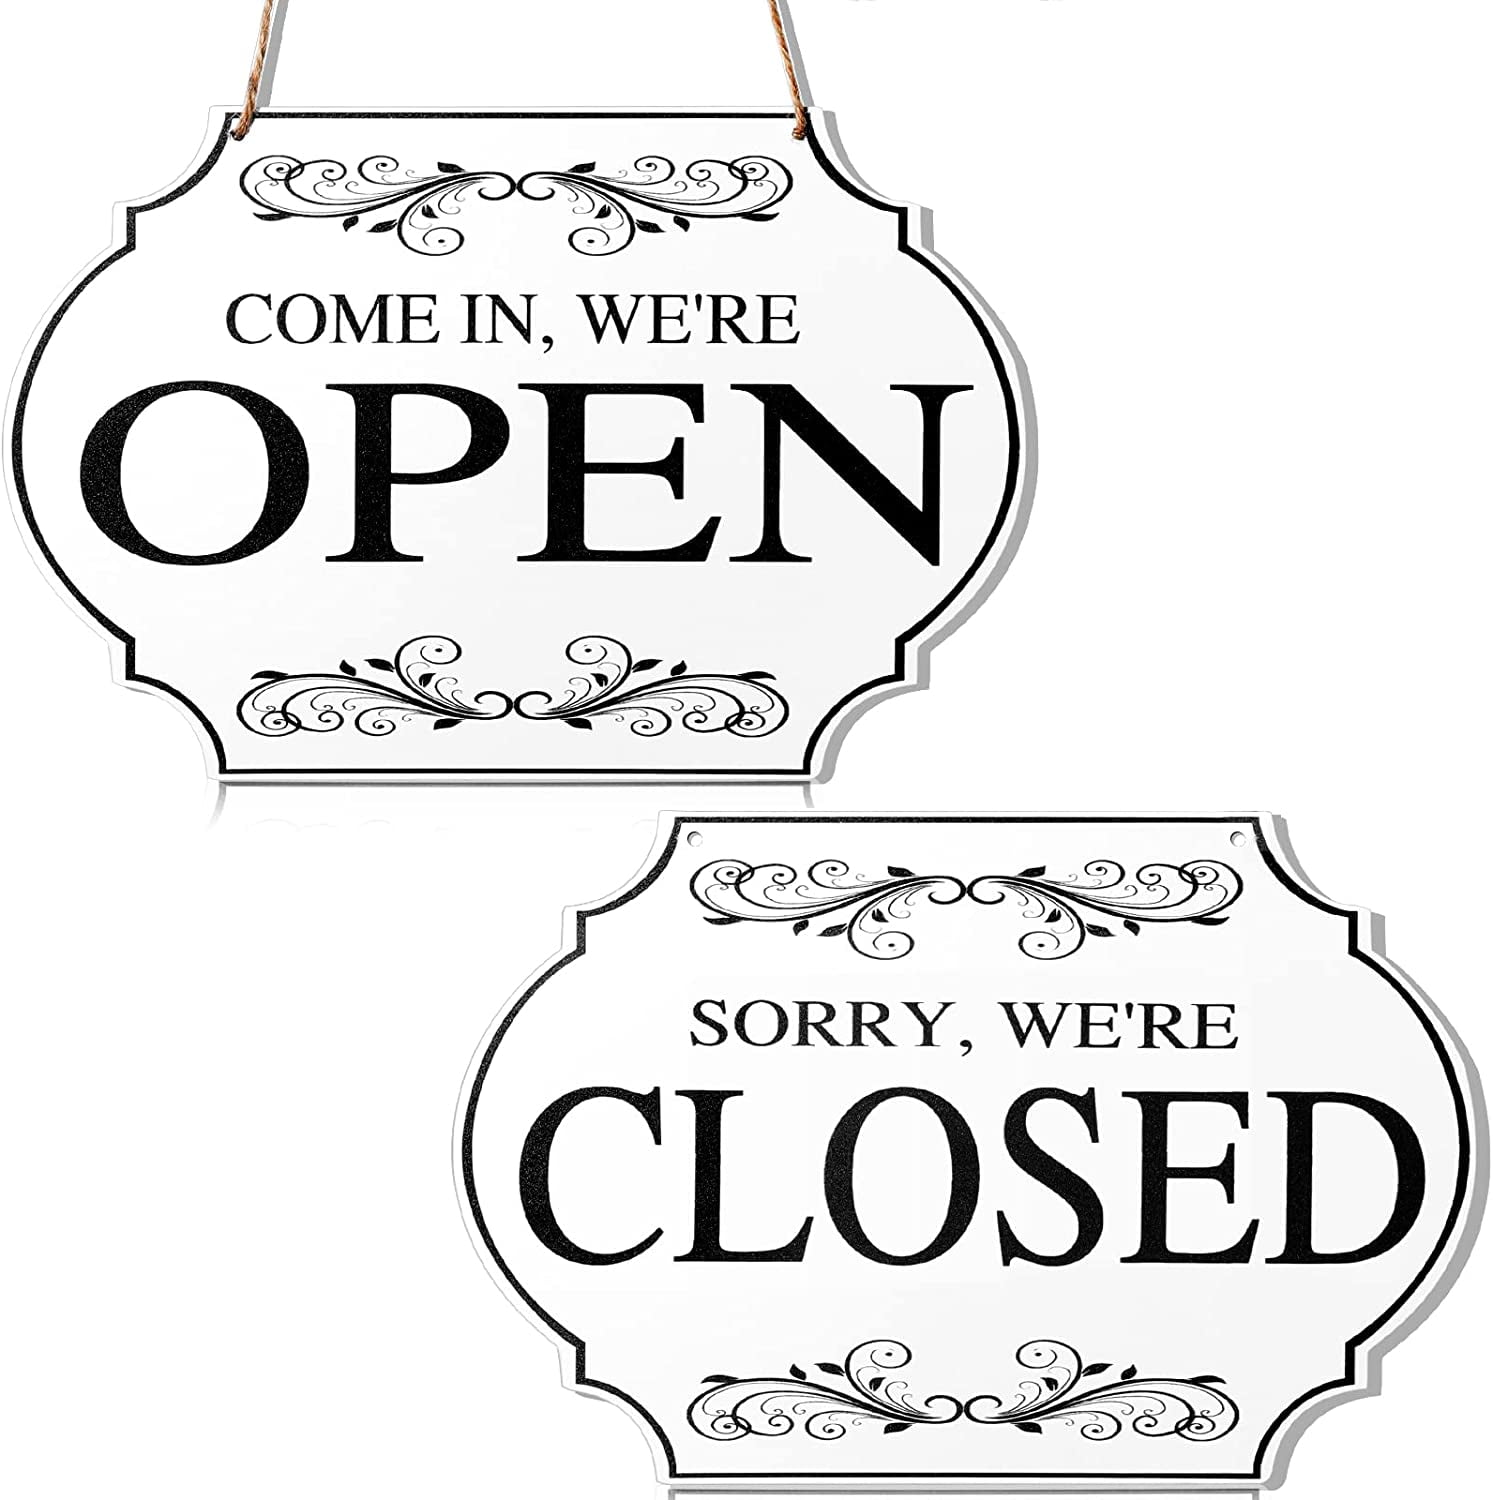 Sorry We're Closed Store Hanging Sign for Coffee Bar Shop Door Window Decoration 11.8x7.8inch Rustic Wooden Store Open and Closed Business Sign Two Sided Reversible Come in We're Open 